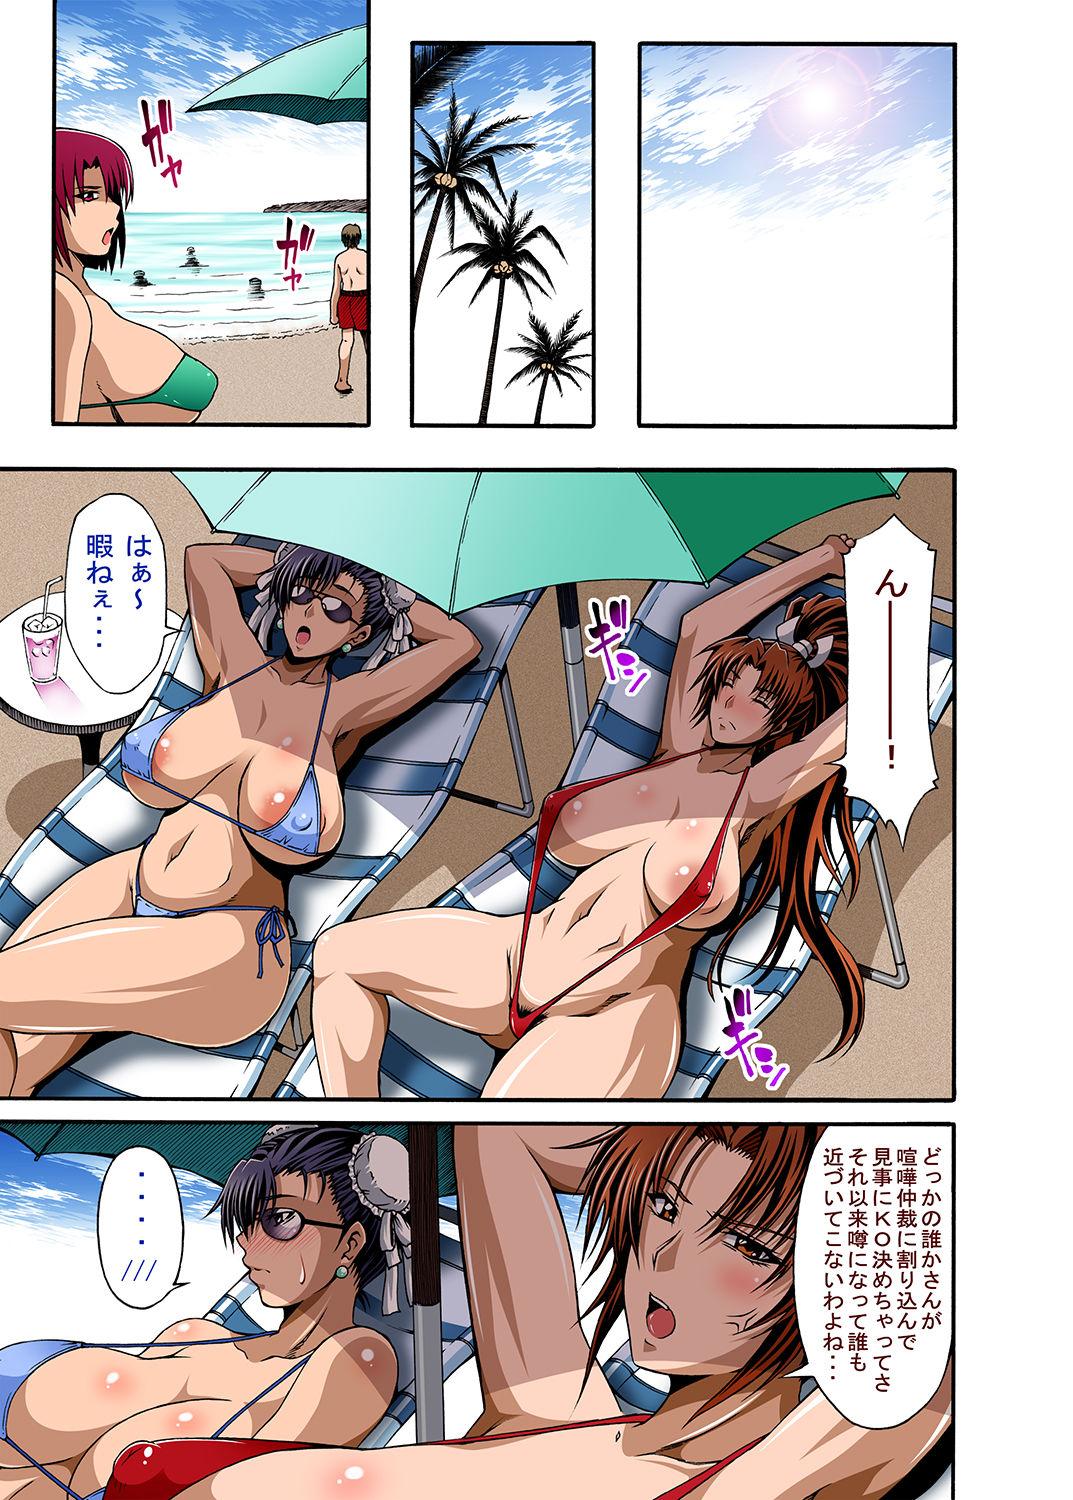 Wetpussy Nipponichi Choroi Onna to Masegaki - Street fighter King of fighters Finger - Page 3